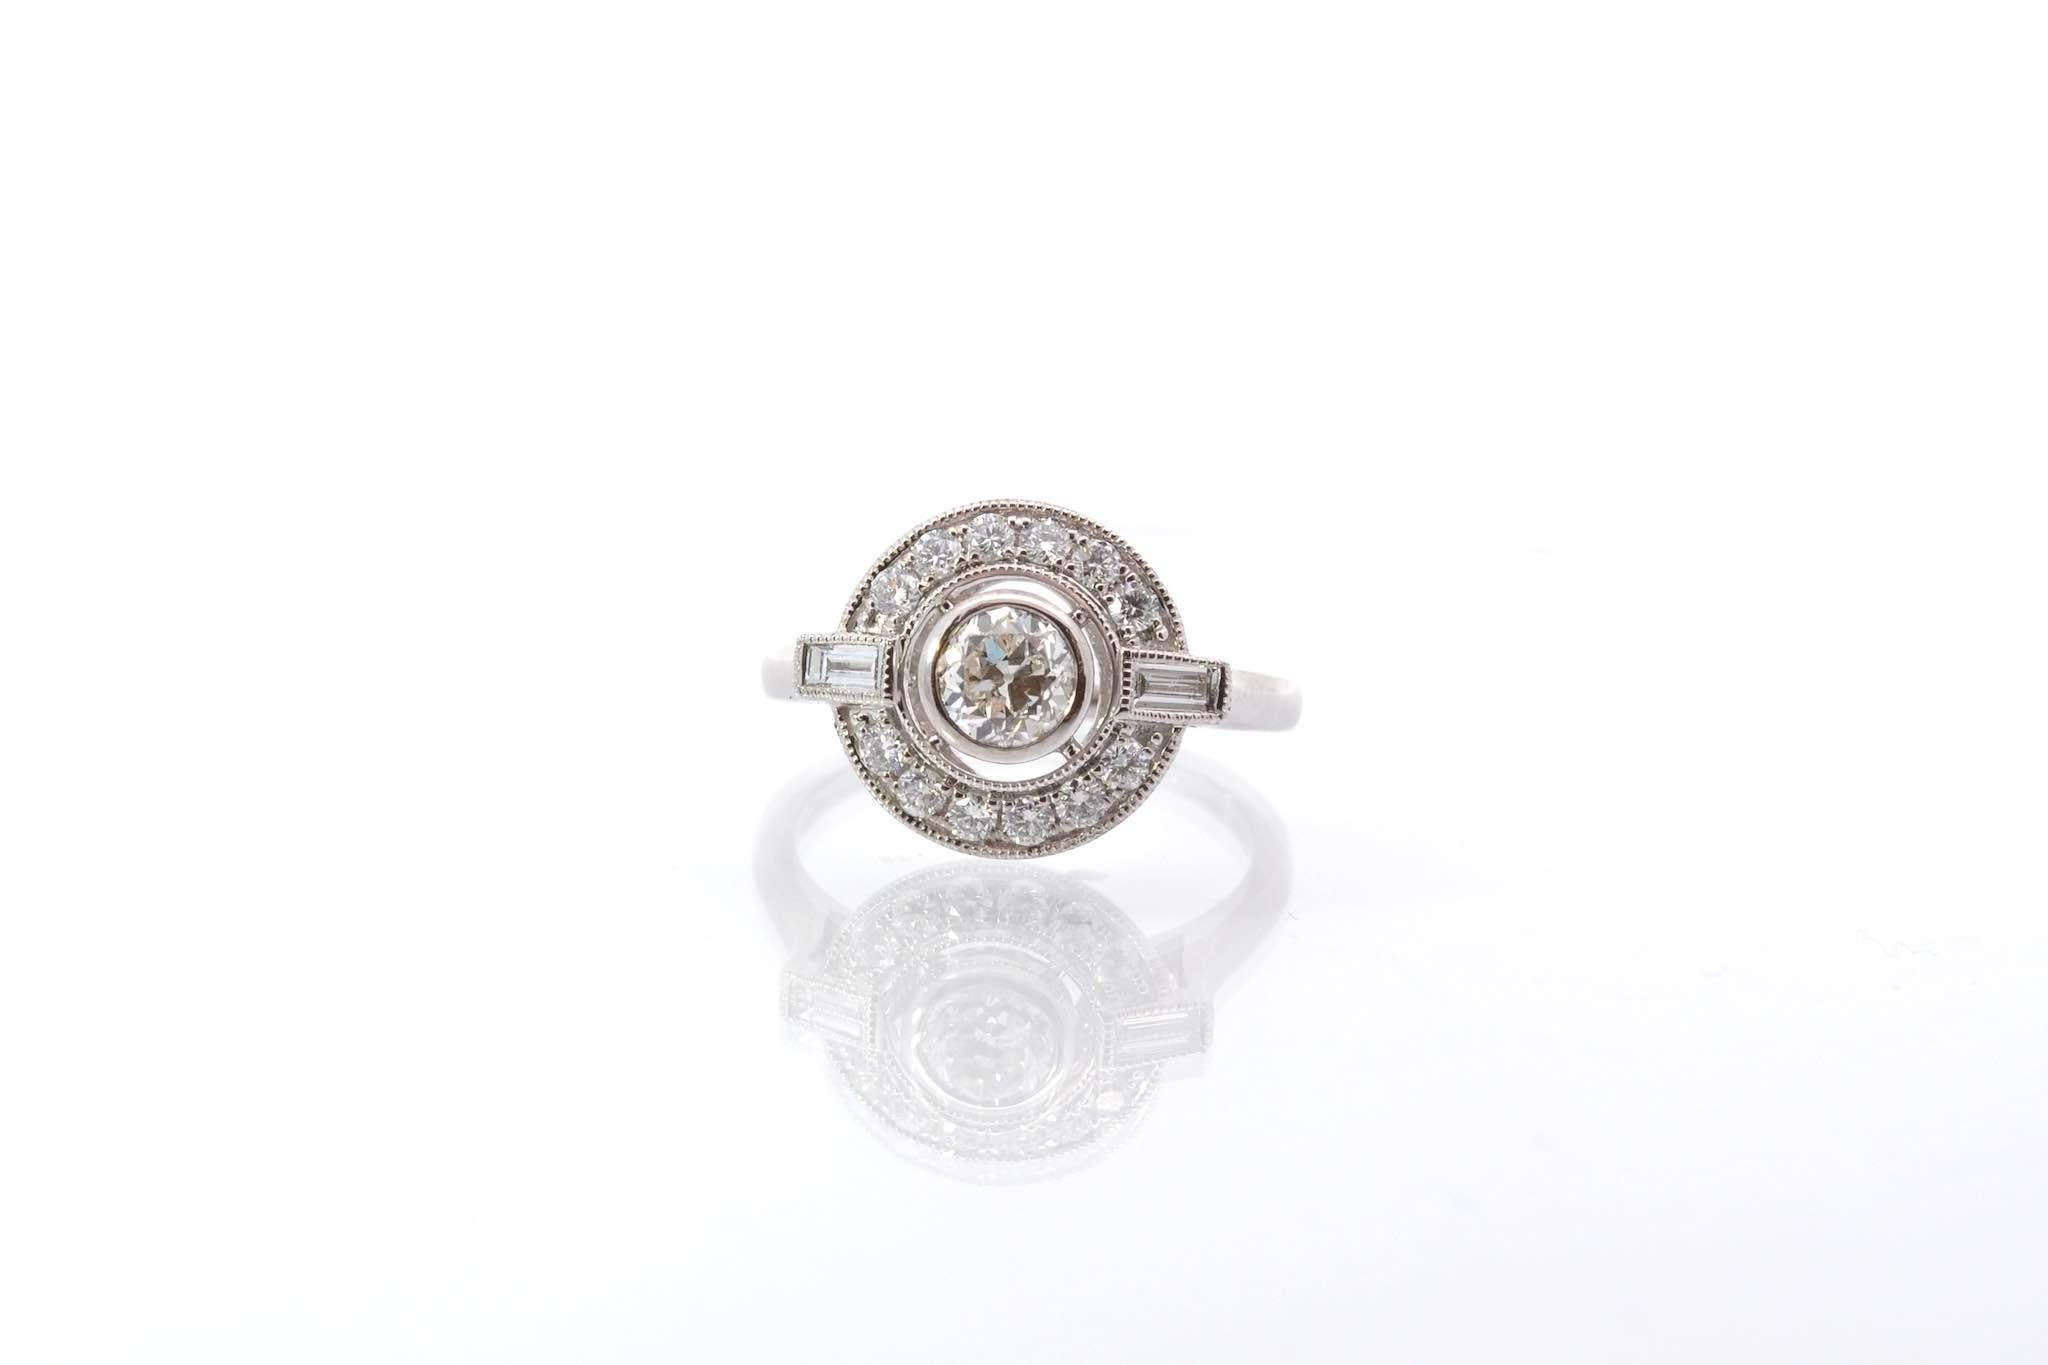 Stones: Central diamond: 0.50 ct, 12 diamonds: 0.30 ct and 2 baguette diamonds: 0.14 ct
Material: 18k white gold
Dimensions: 1.2 cm
Weight: 4.4g
Period: Recent vintage Art Deco style
Size: 52 (free sizing)
Certificate
Ref. : 25567 25501E